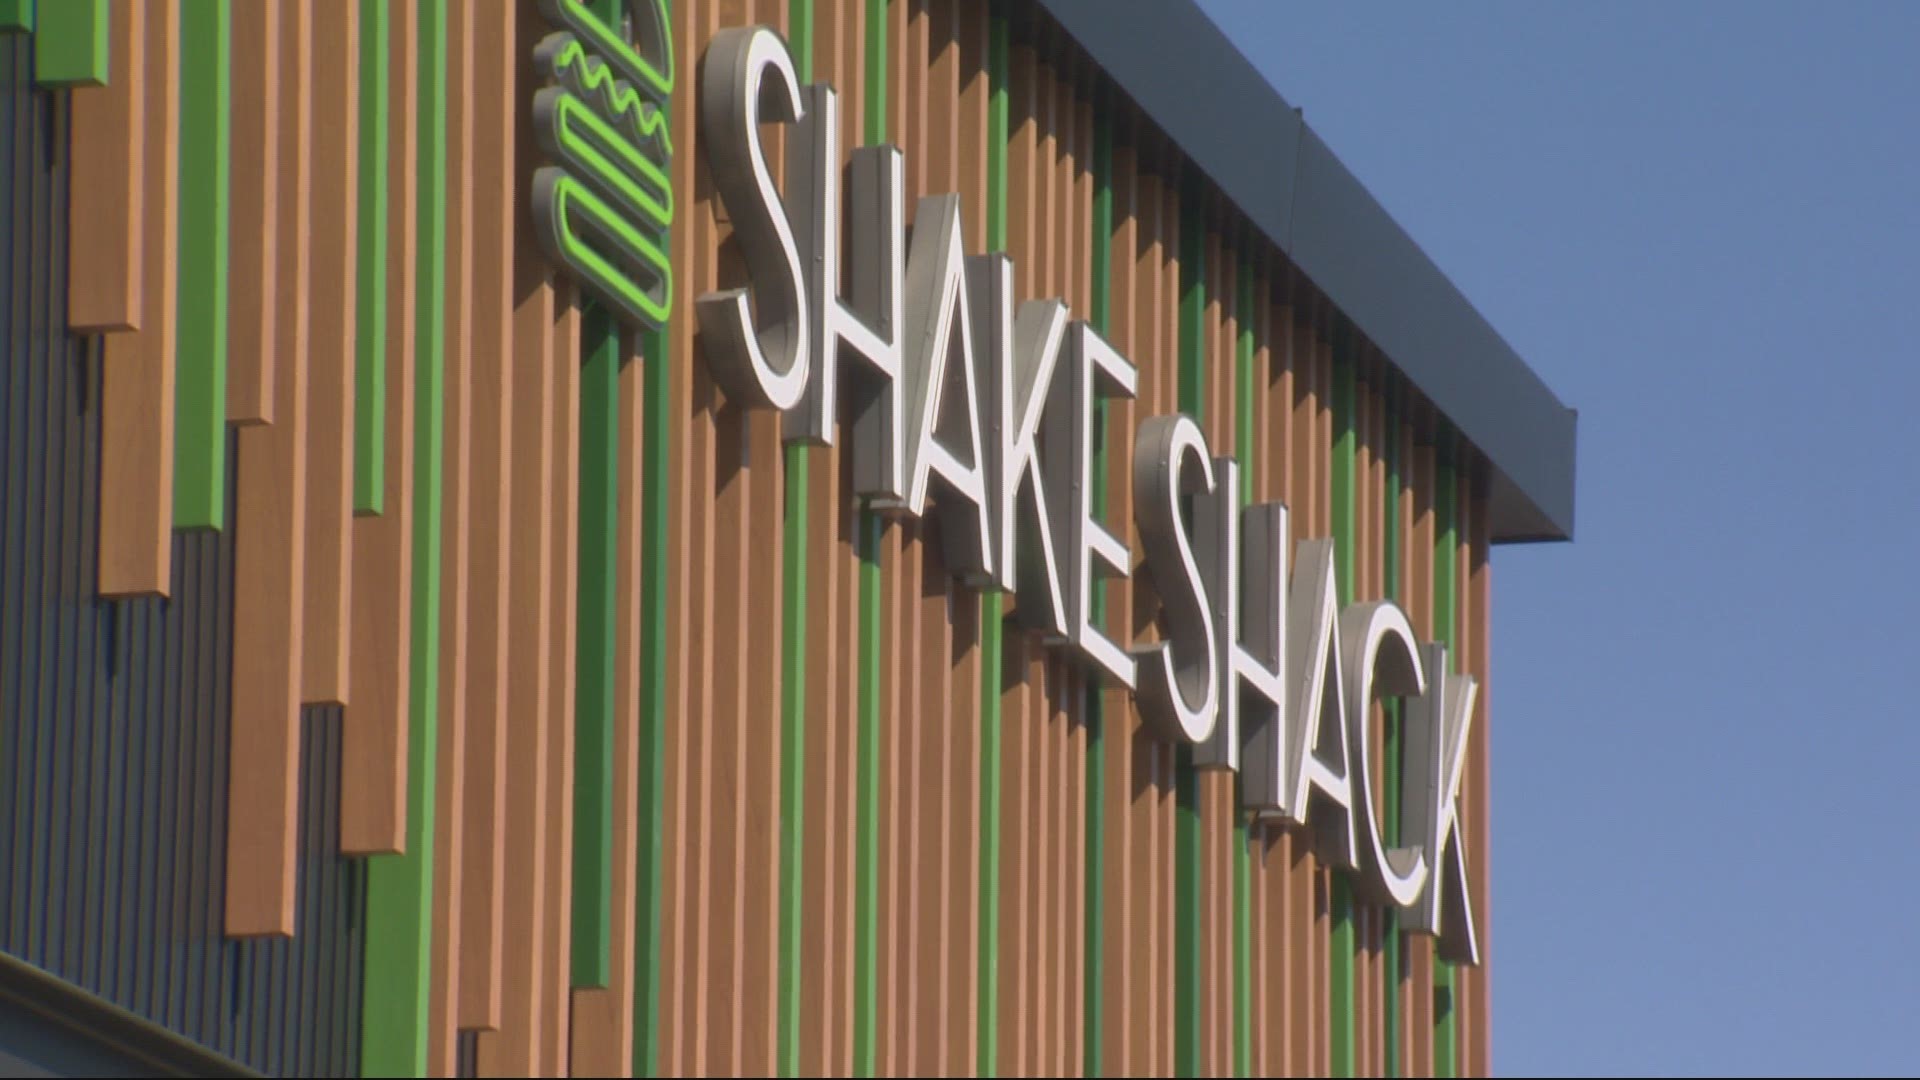 Shake Shack opened its first location in Oregon on Friday. Joe Raineri reports from the new restaurant in Beaverton.